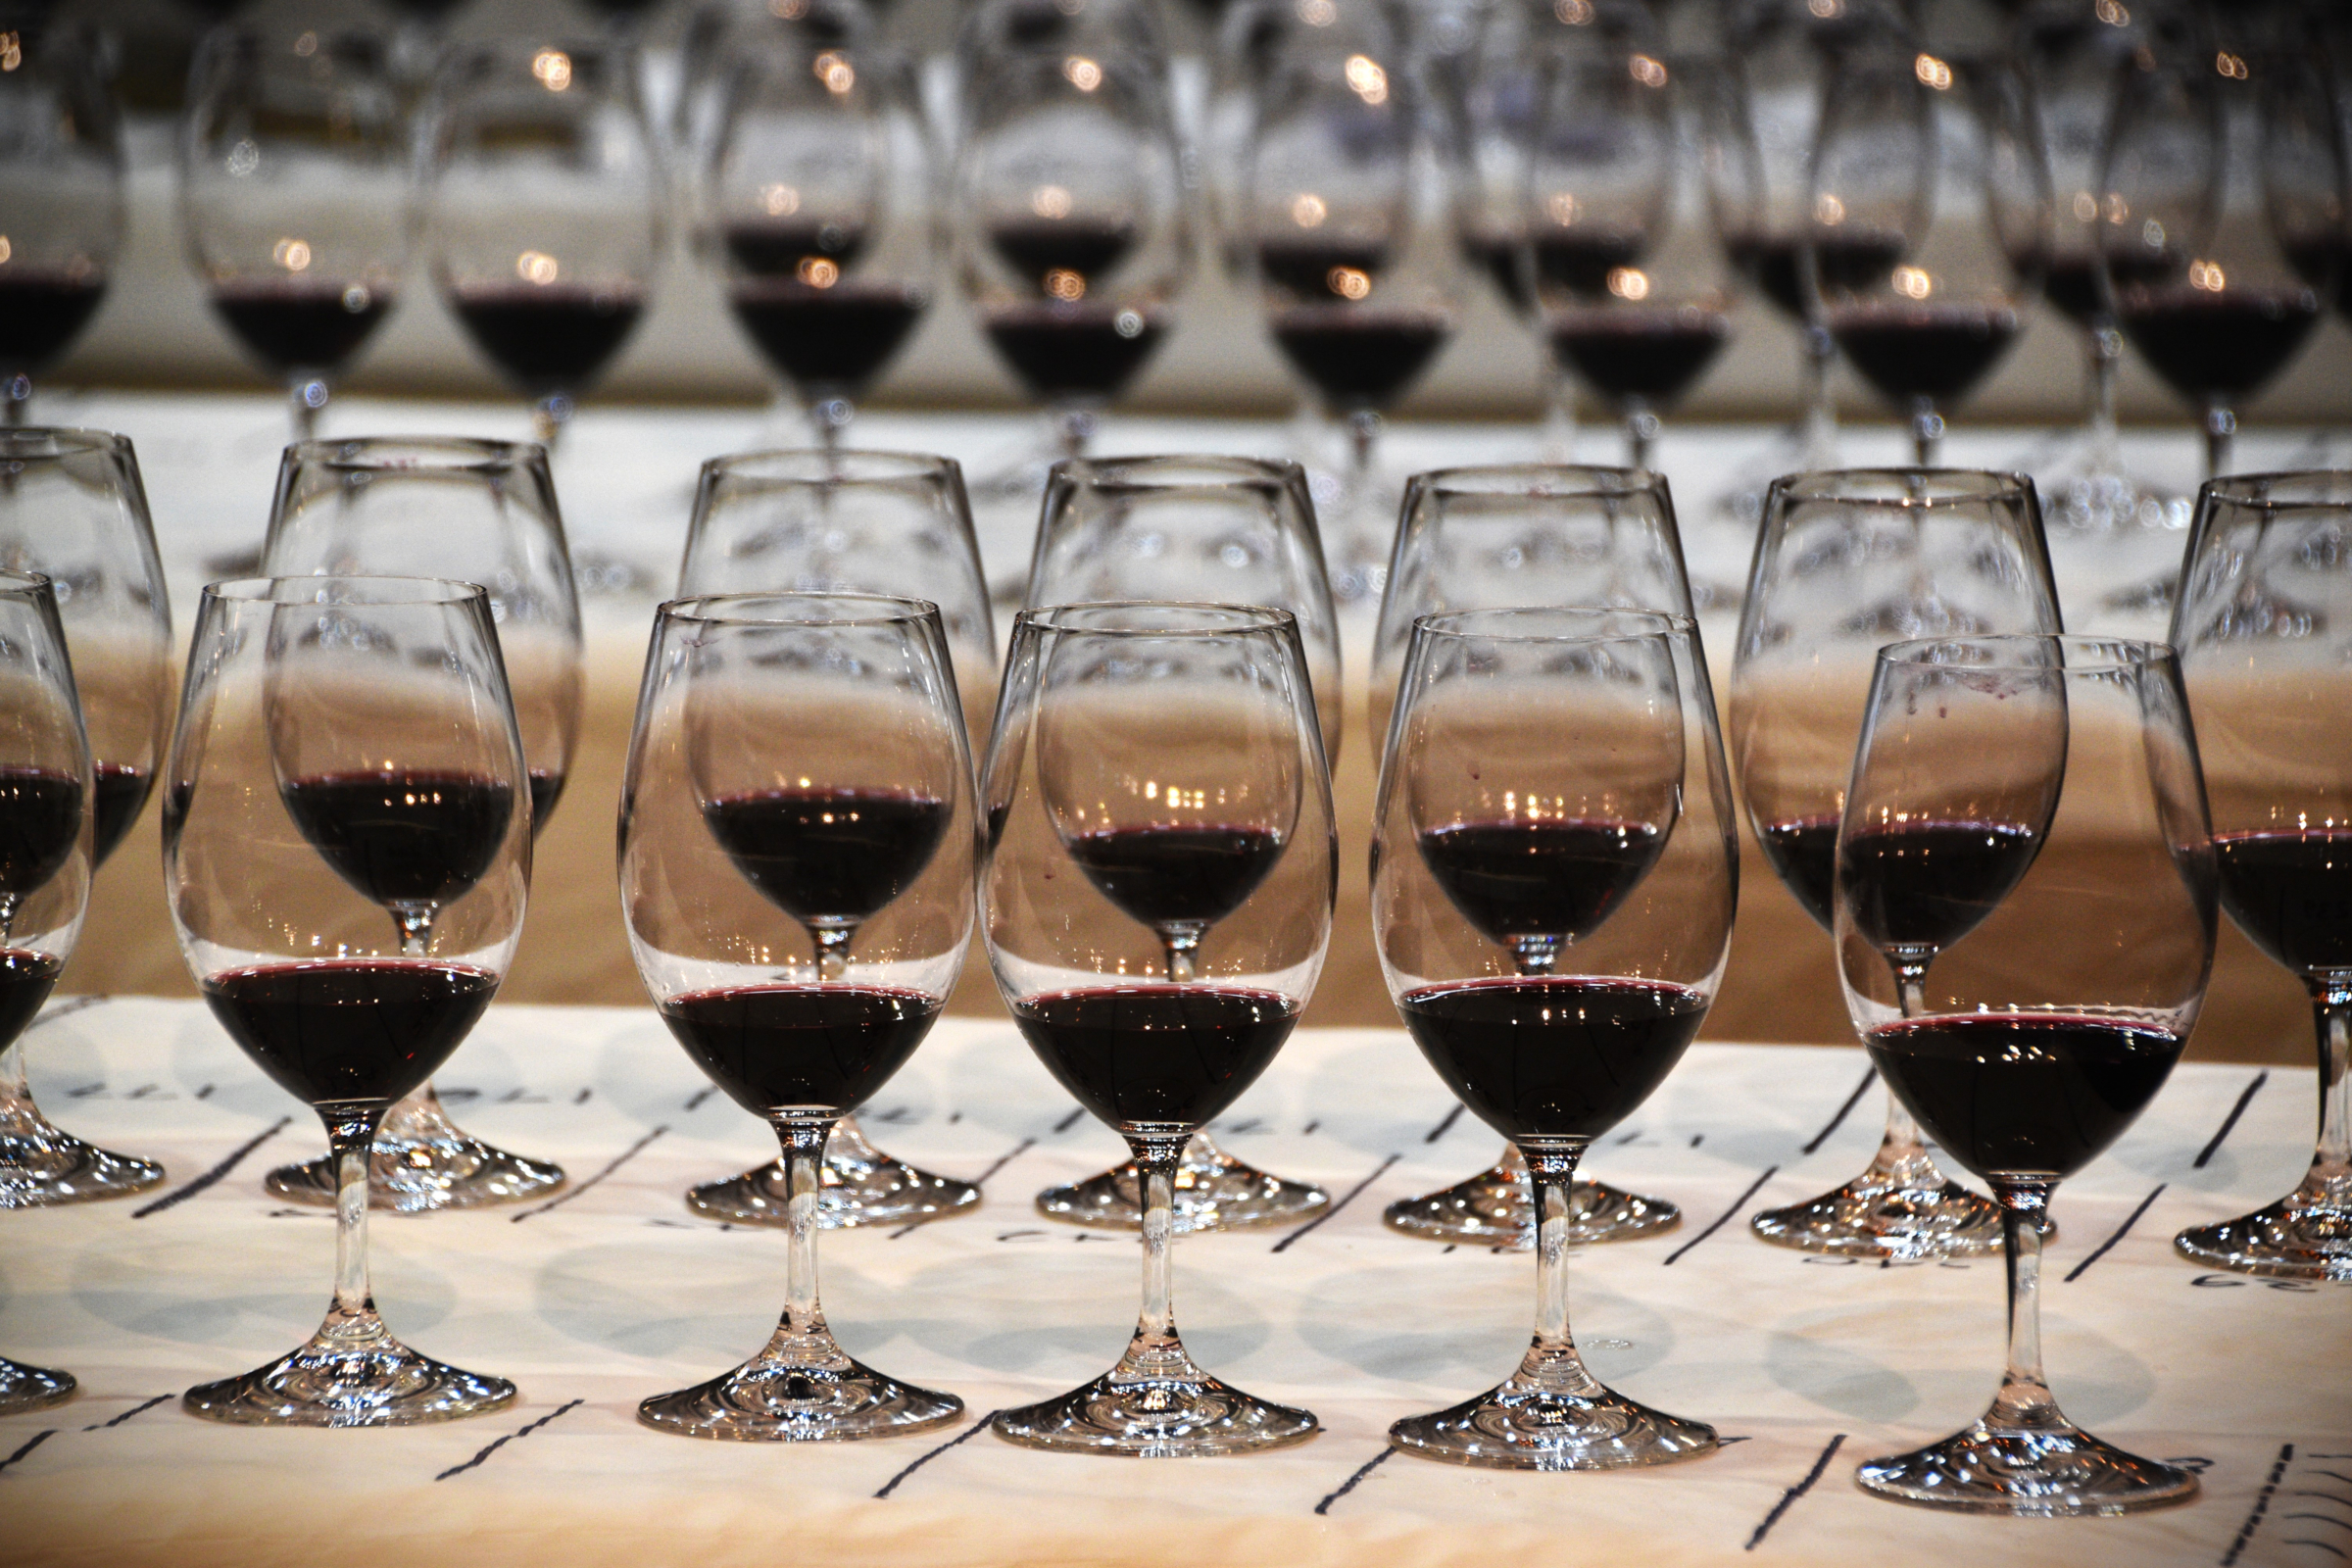 Rows of wine glasses with a small amount of red wine in each, sitting on thin tables between black lines marked on white paper. Each glass has a number on the table. Tables blur into the distance.